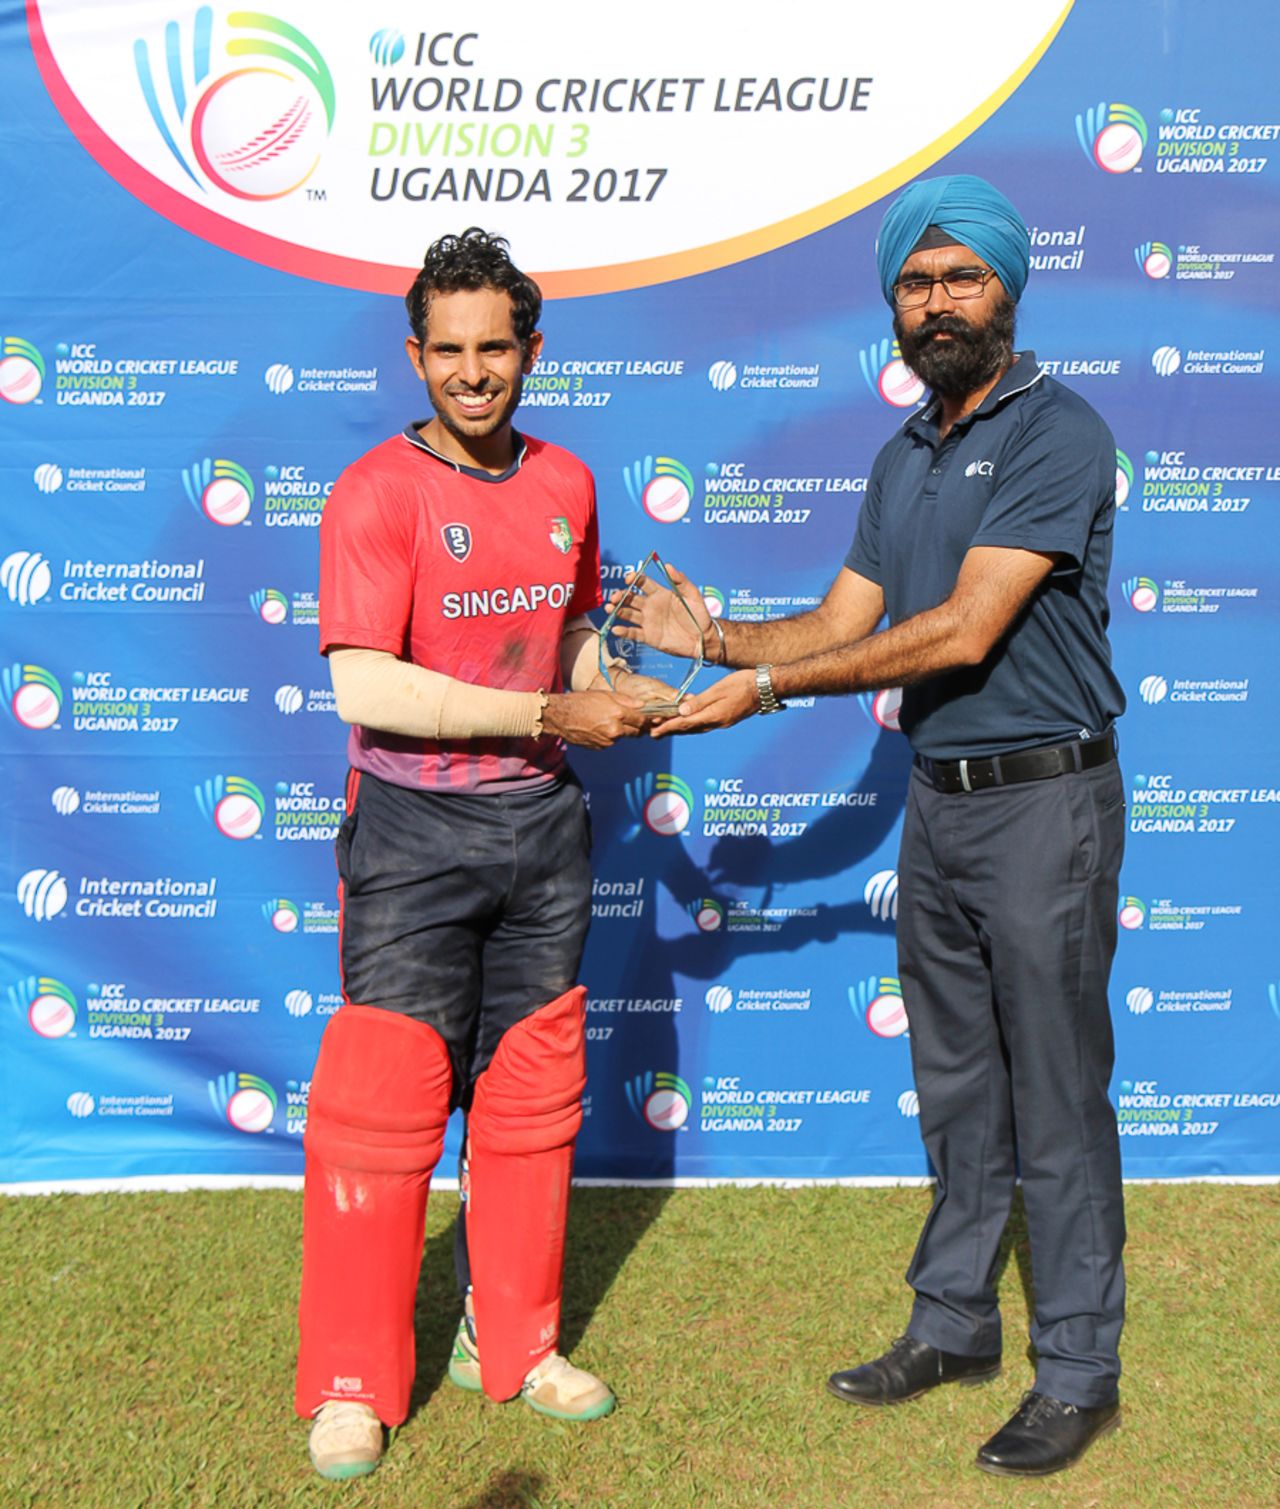 Arjun Mutreja accepts the Man of the Match award from ICC official Gurjit Singh, Singapore v USA, ICC World Cricket League Division Three, Kampala, May 26, 2017